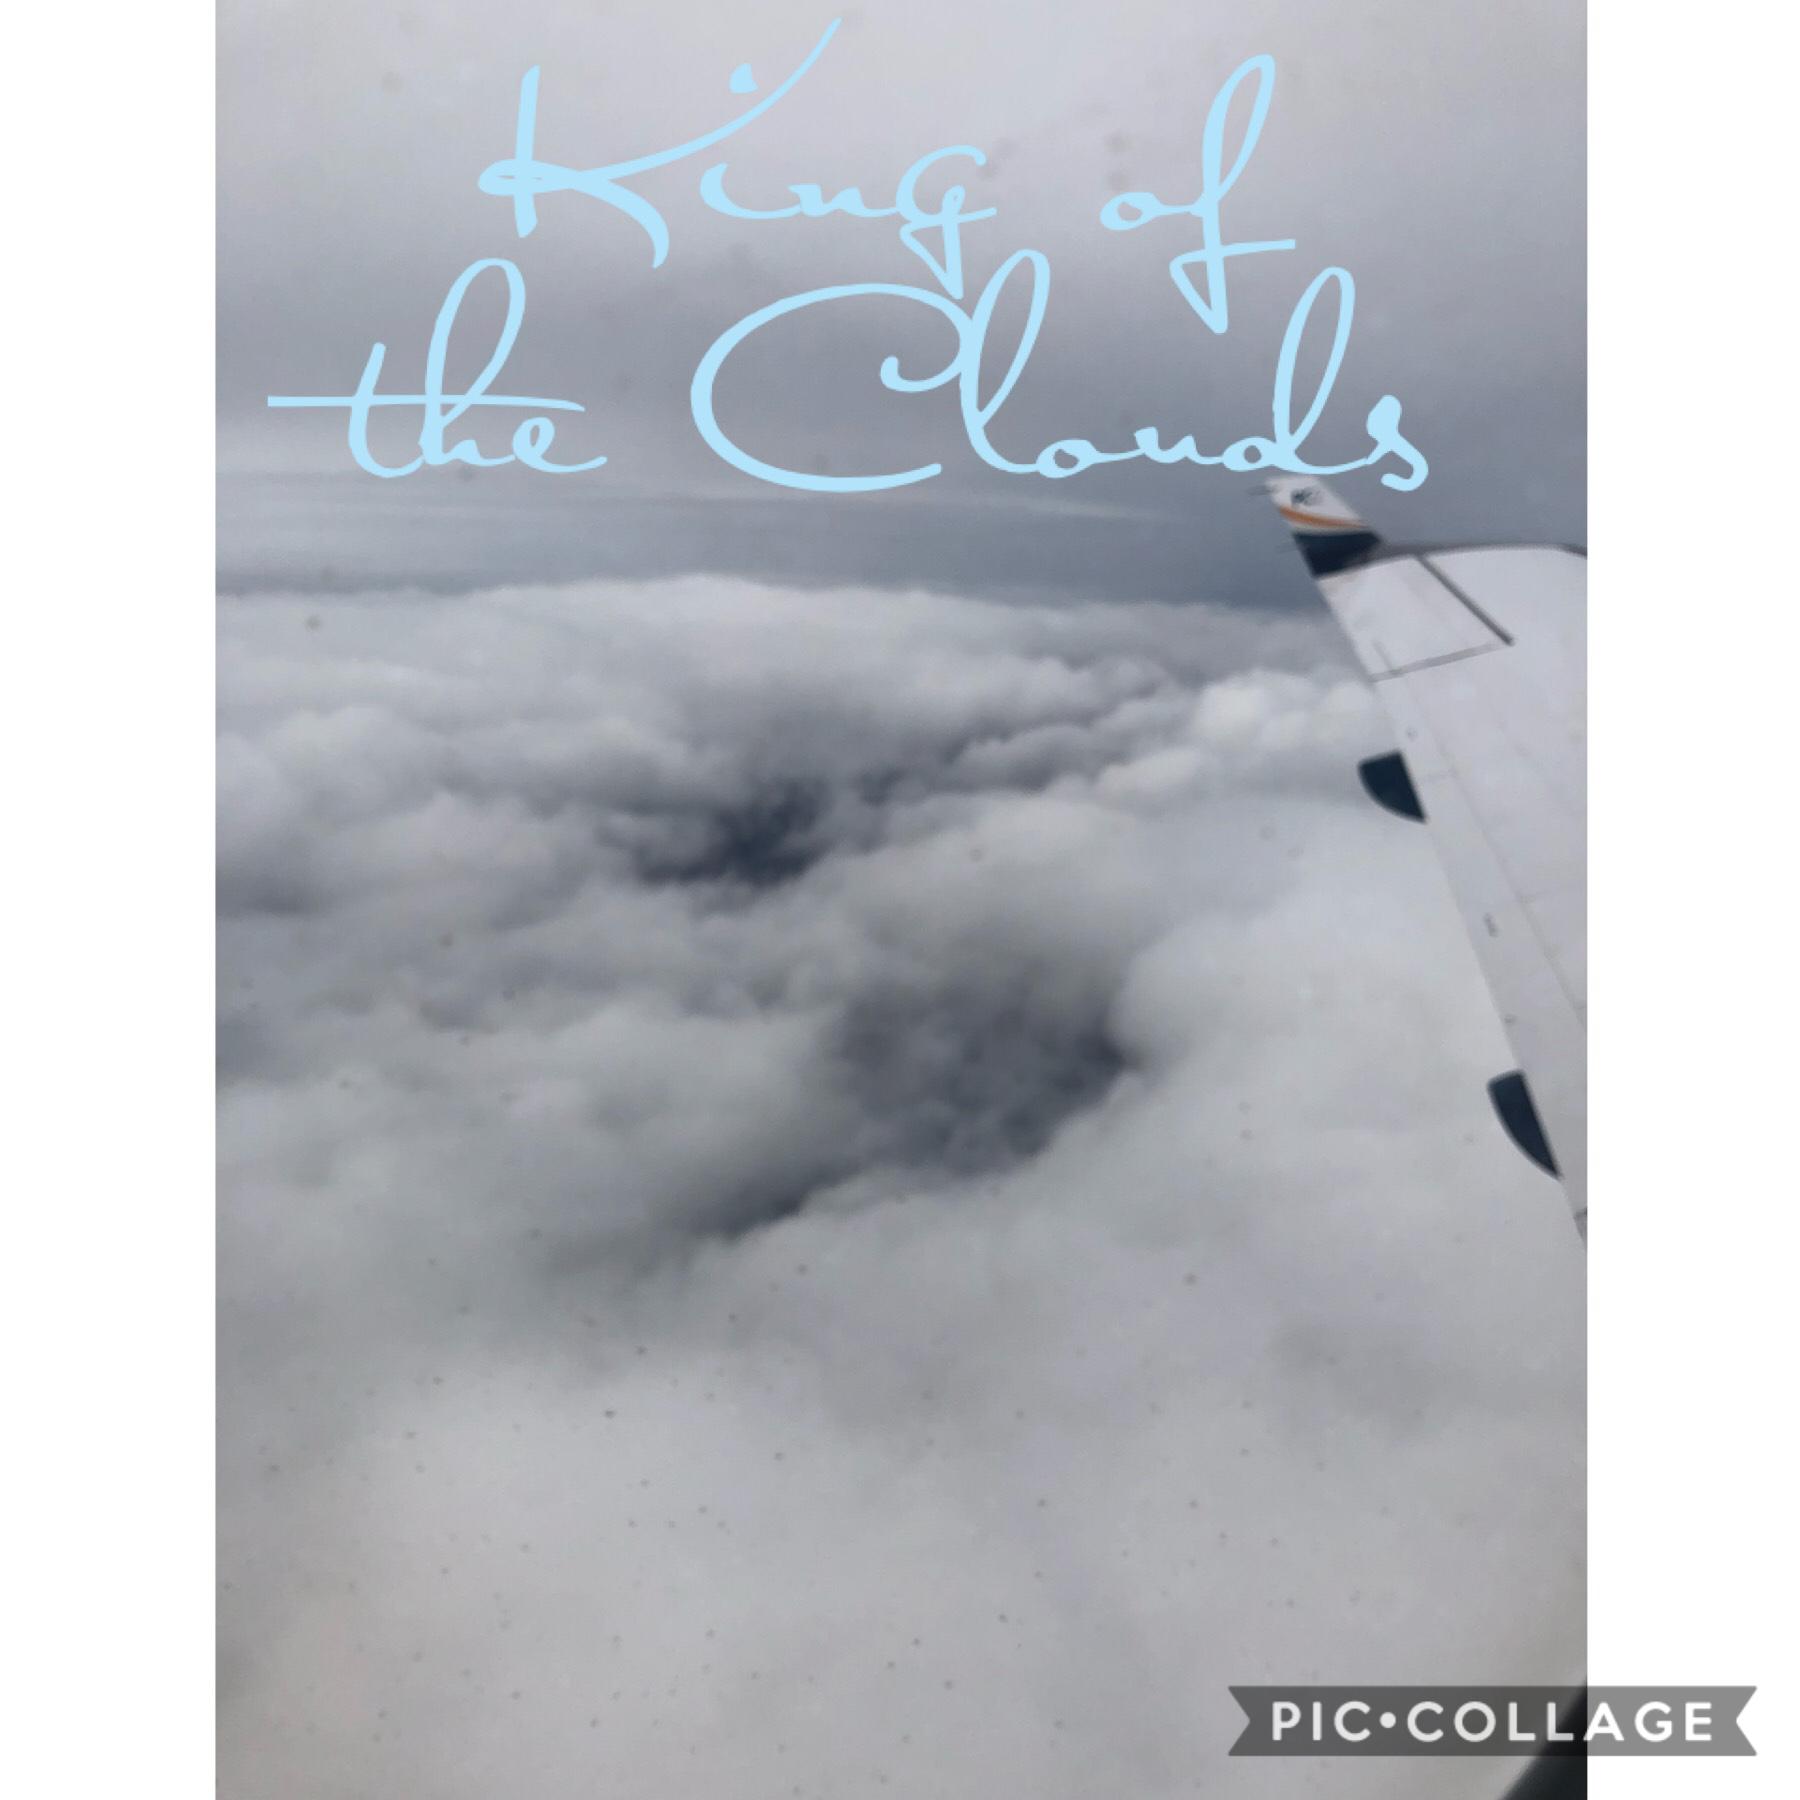 When I was on a plane I looked out the window right when “King of the Clouds” had just started to play. 
(It was nice ok)